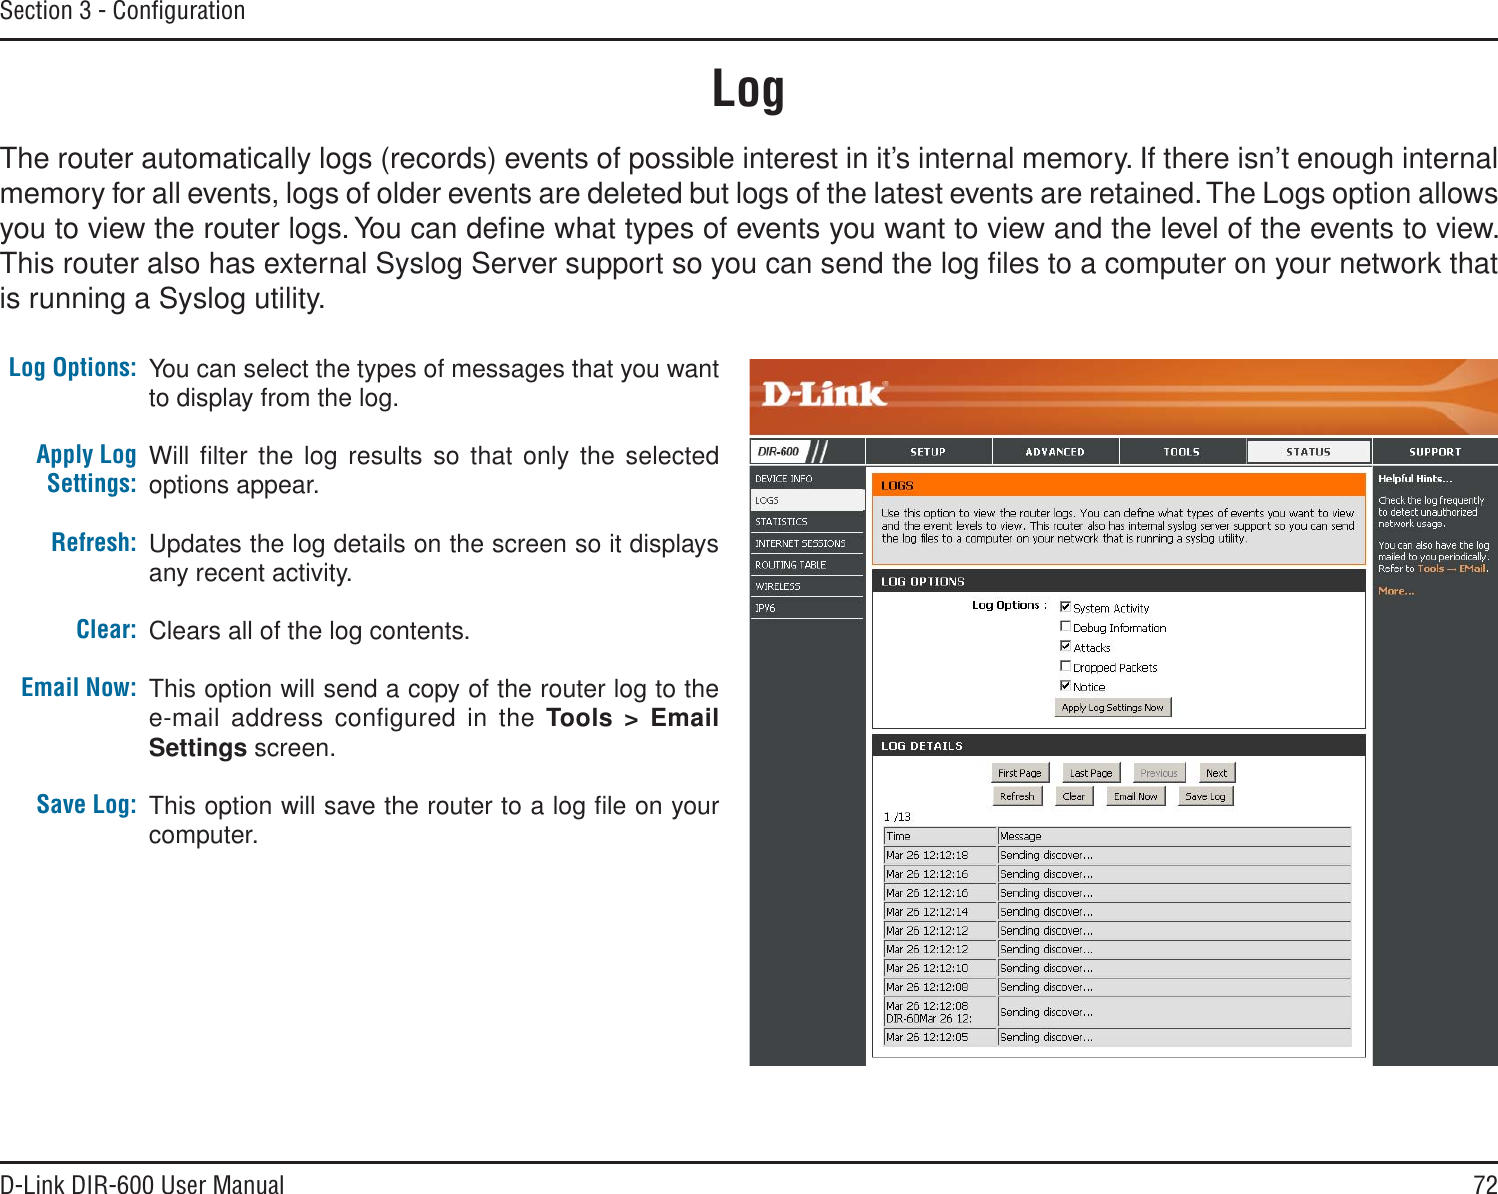 72D-Link DIR-600 User ManualSection 3 - ConﬁgurationLogLog Options:Apply Log Settings:Refresh:Clear:Email Now:Save Log:You can select the types of messages that you want to display from the log. Will ﬁlter the log results so that only the selected options appear.Updates the log details on the screen so it displays any recent activity.Clears all of the log contents.This option will send a copy of the router log to the e-mail address conﬁgured in the Tools &gt; EmailSettings screen.This option will save the router to a log ﬁle on your computer.The router automatically logs (records) events of possible interest in it’s internal memory. If there isn’t enough internal memory for all events, logs of older events are deleted but logs of the latest events are retained. The Logs option allows you to view the router logs. You can deﬁne what types of events you want to view and the level of the events to view. This router also has external Syslog Server support so you can send the log ﬁles to a computer on your network that is running a Syslog utility.